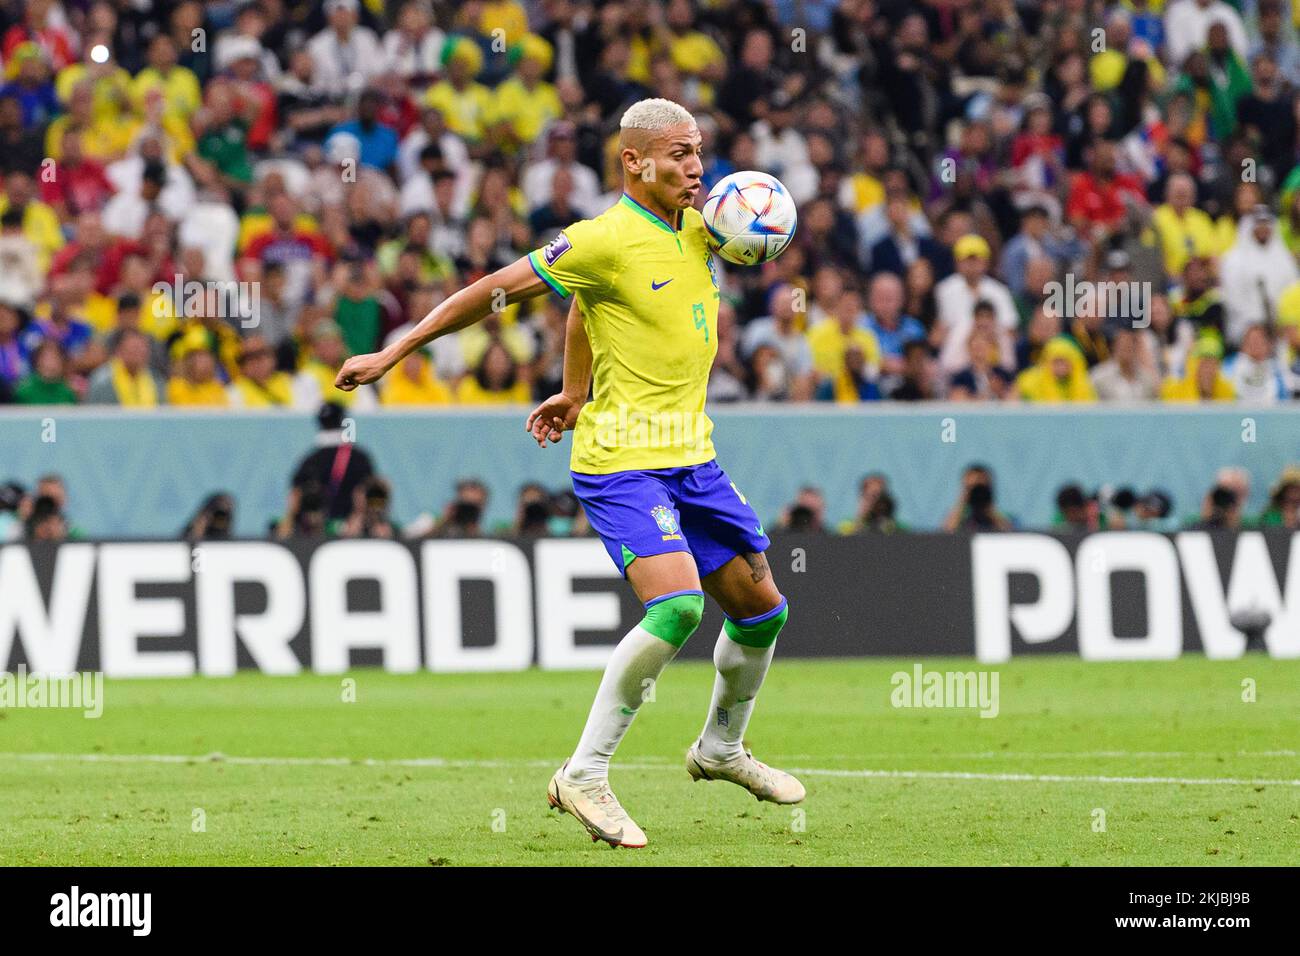 Lusail, Qatar. 24th Nov, 2022. Lusail, Qatar, Nov 25th 2022: Richarlison of Brazil during a match between Brazil vs Serbia, valid for the group stage of the World Cup, held at the Lusail National Stadium in Lusail, Qatar. (Marcio Machado/SPP) Credit: SPP Sport Press Photo. /Alamy Live News Stock Photo